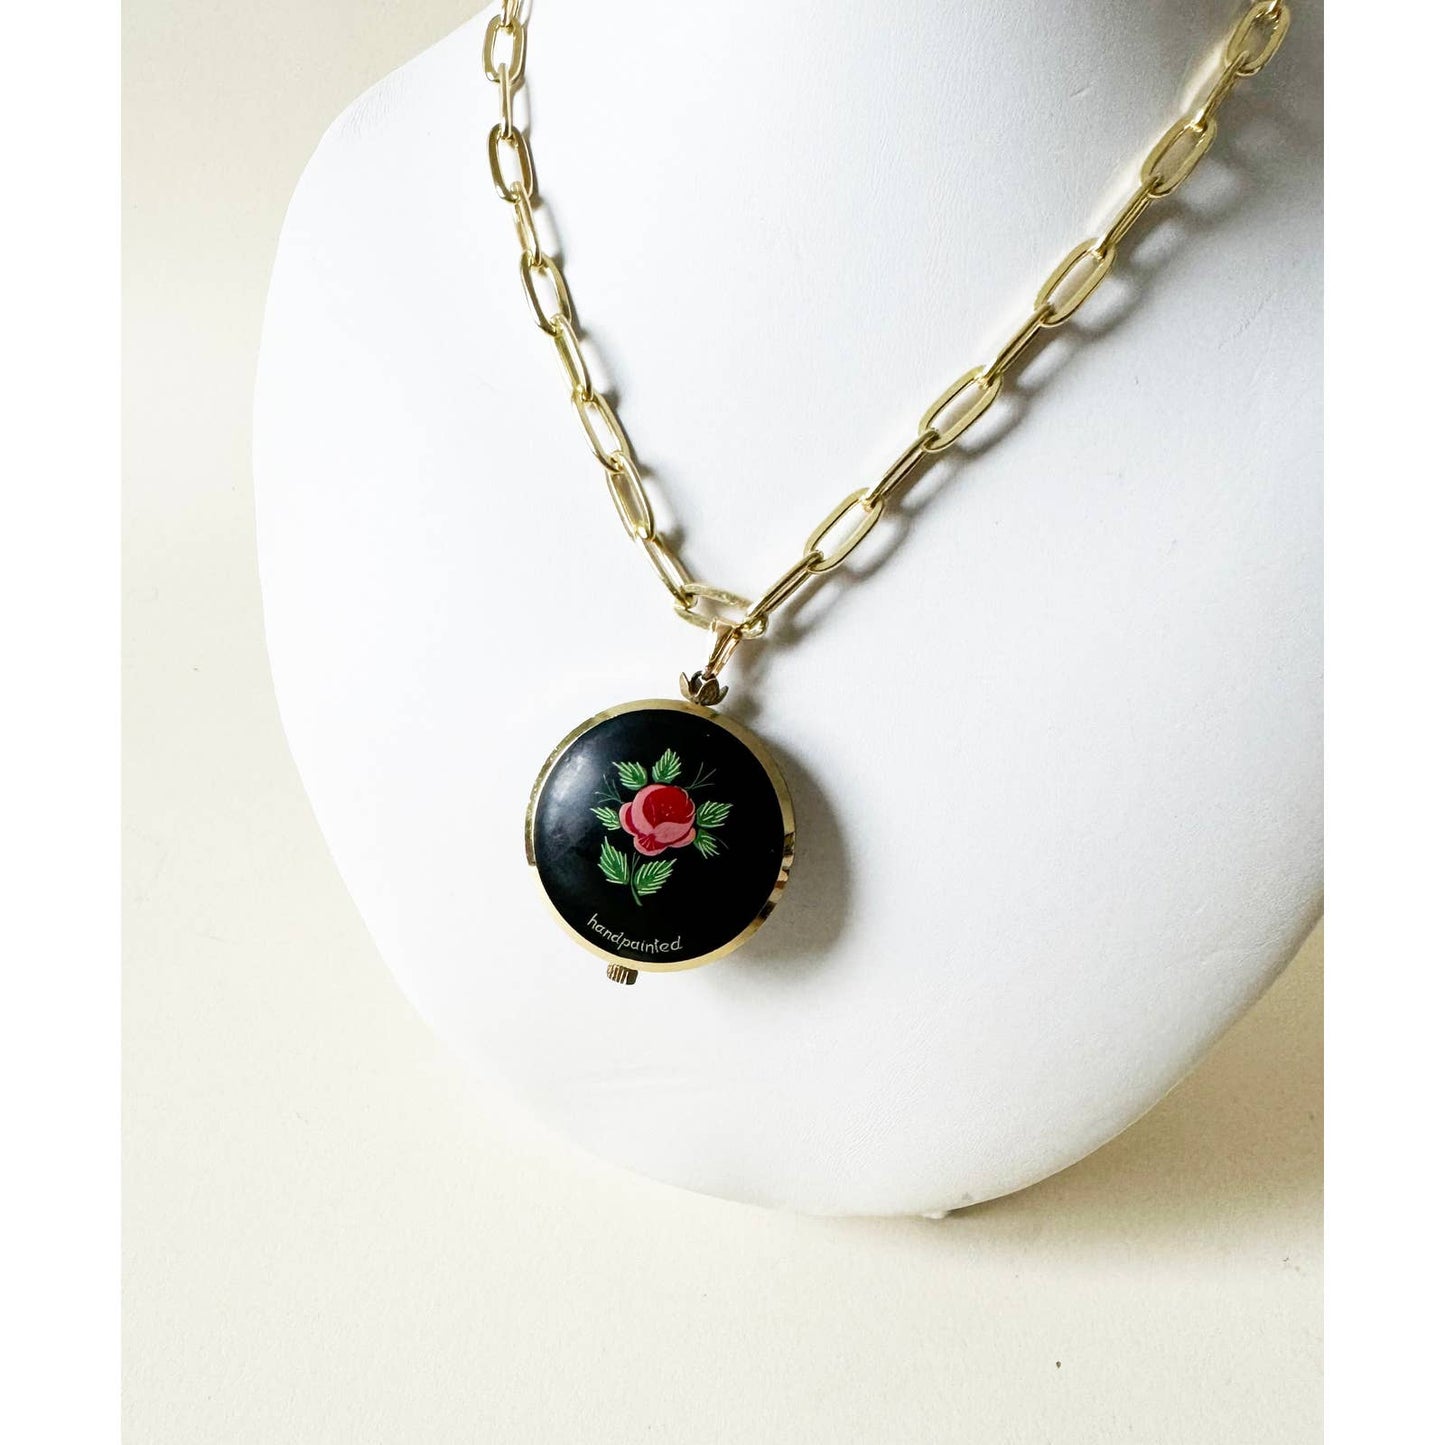 Watch Hand Painted Black Flower Charm Necklace | 925 Gold Vermeil Chain